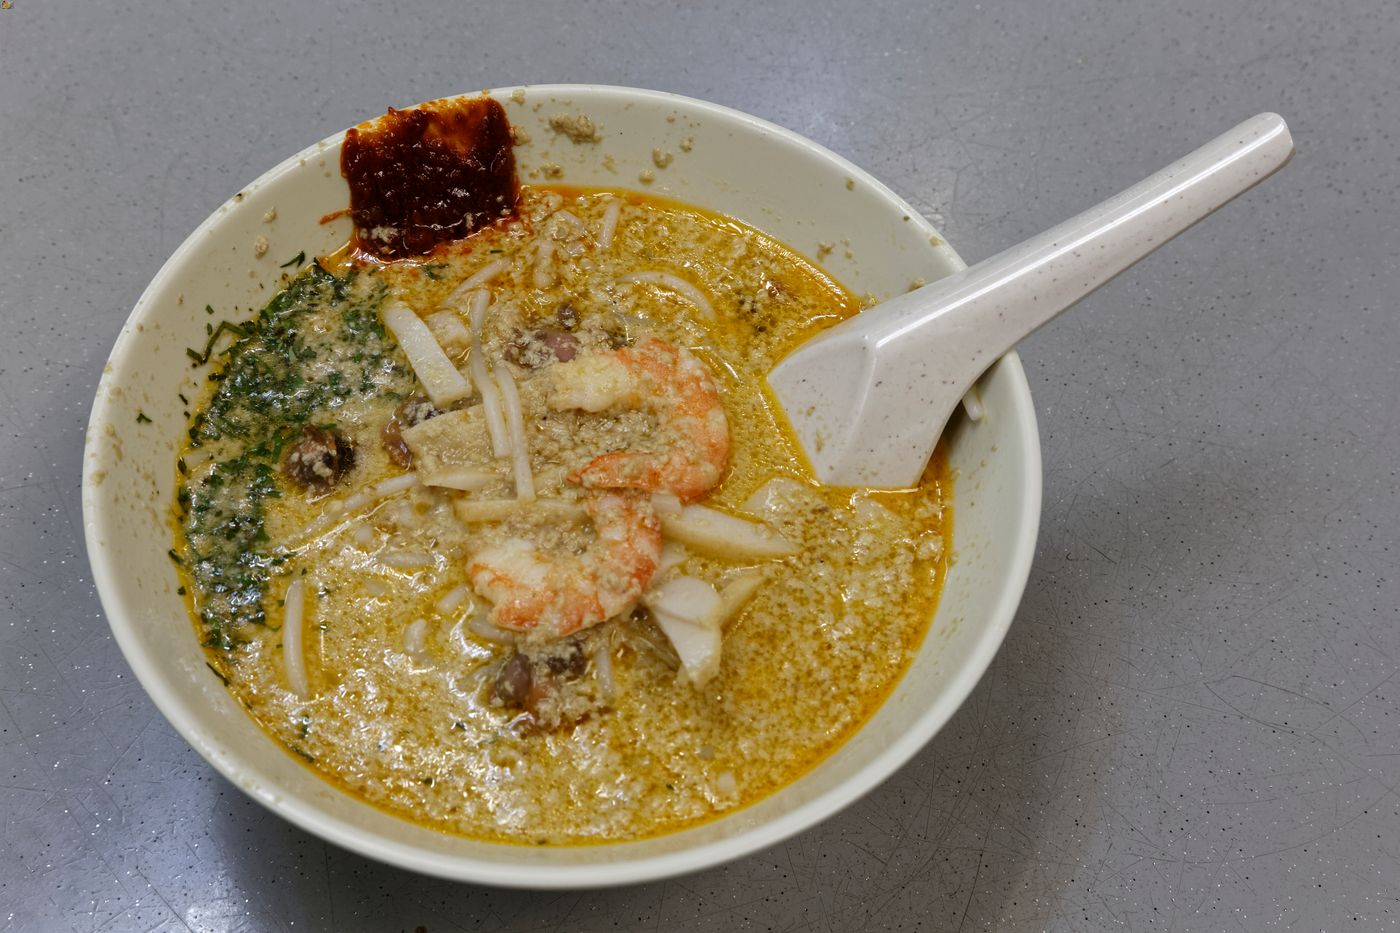 A bowl of laksa from a stall in Katong, where many laksa stalls are located.